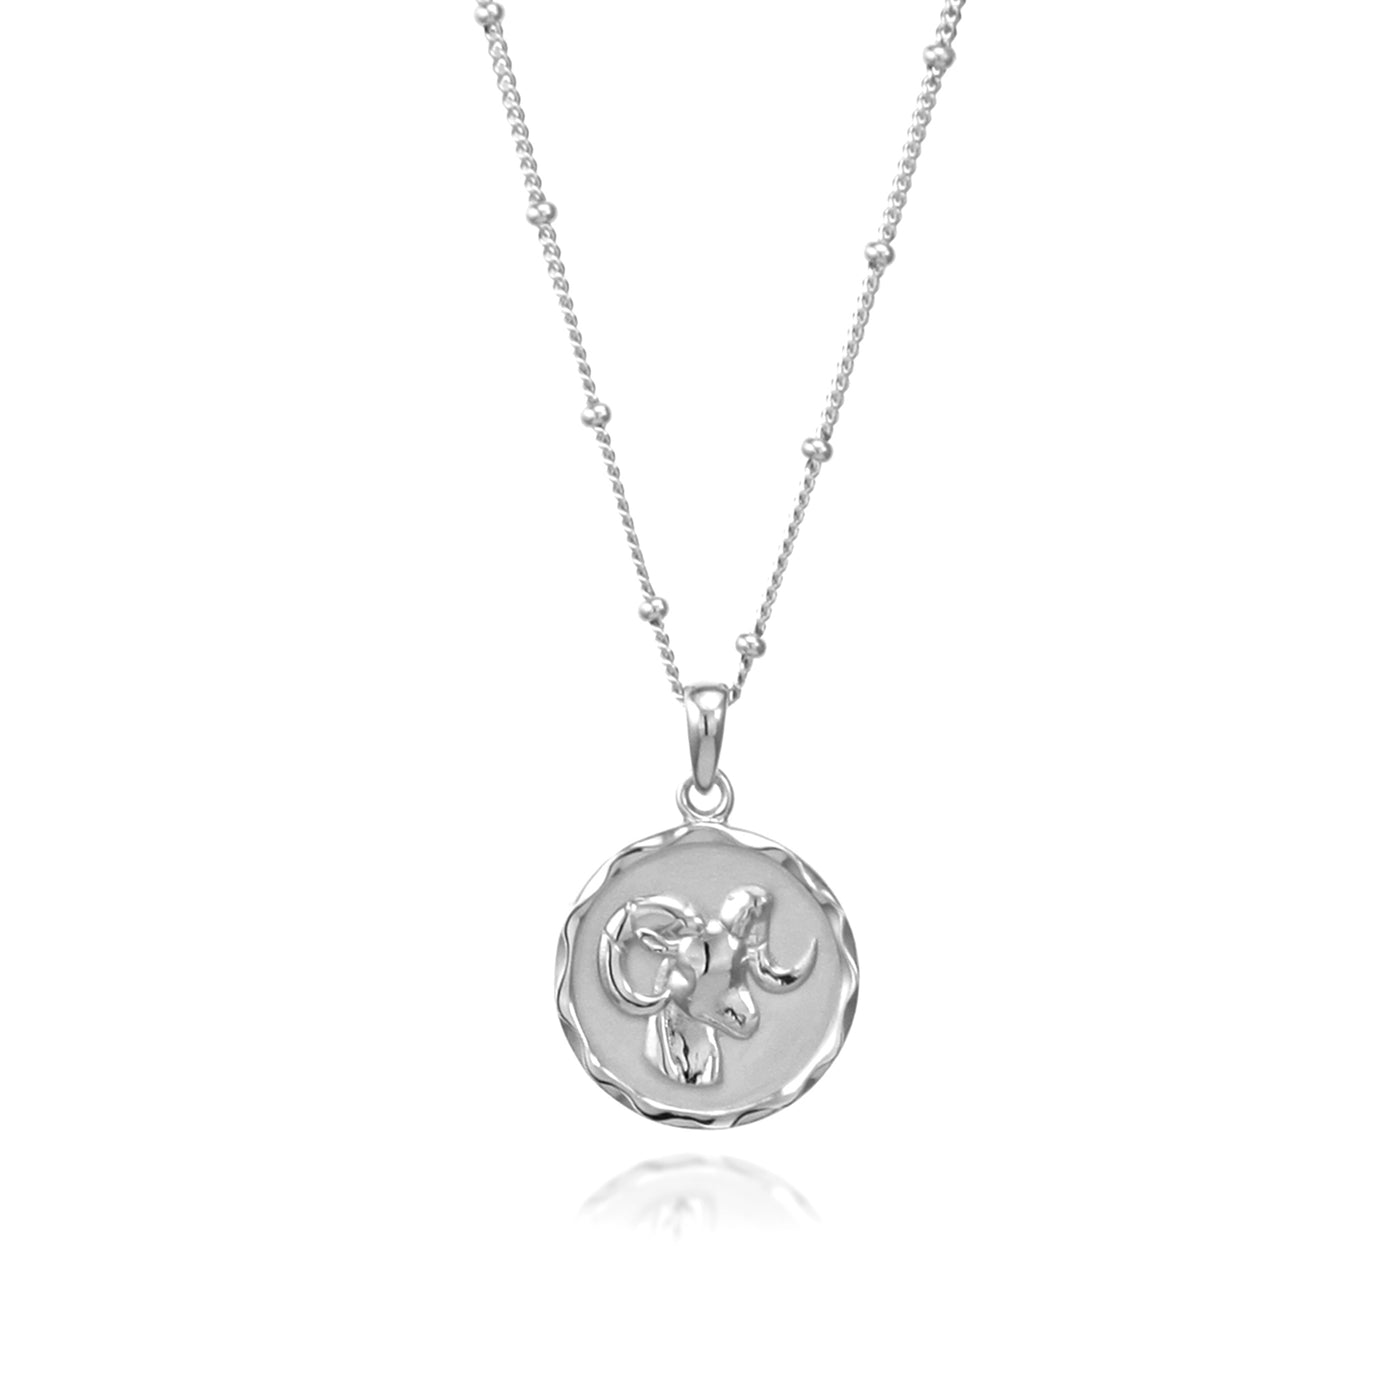 Silver Aries Zodiac Star Sign Necklace